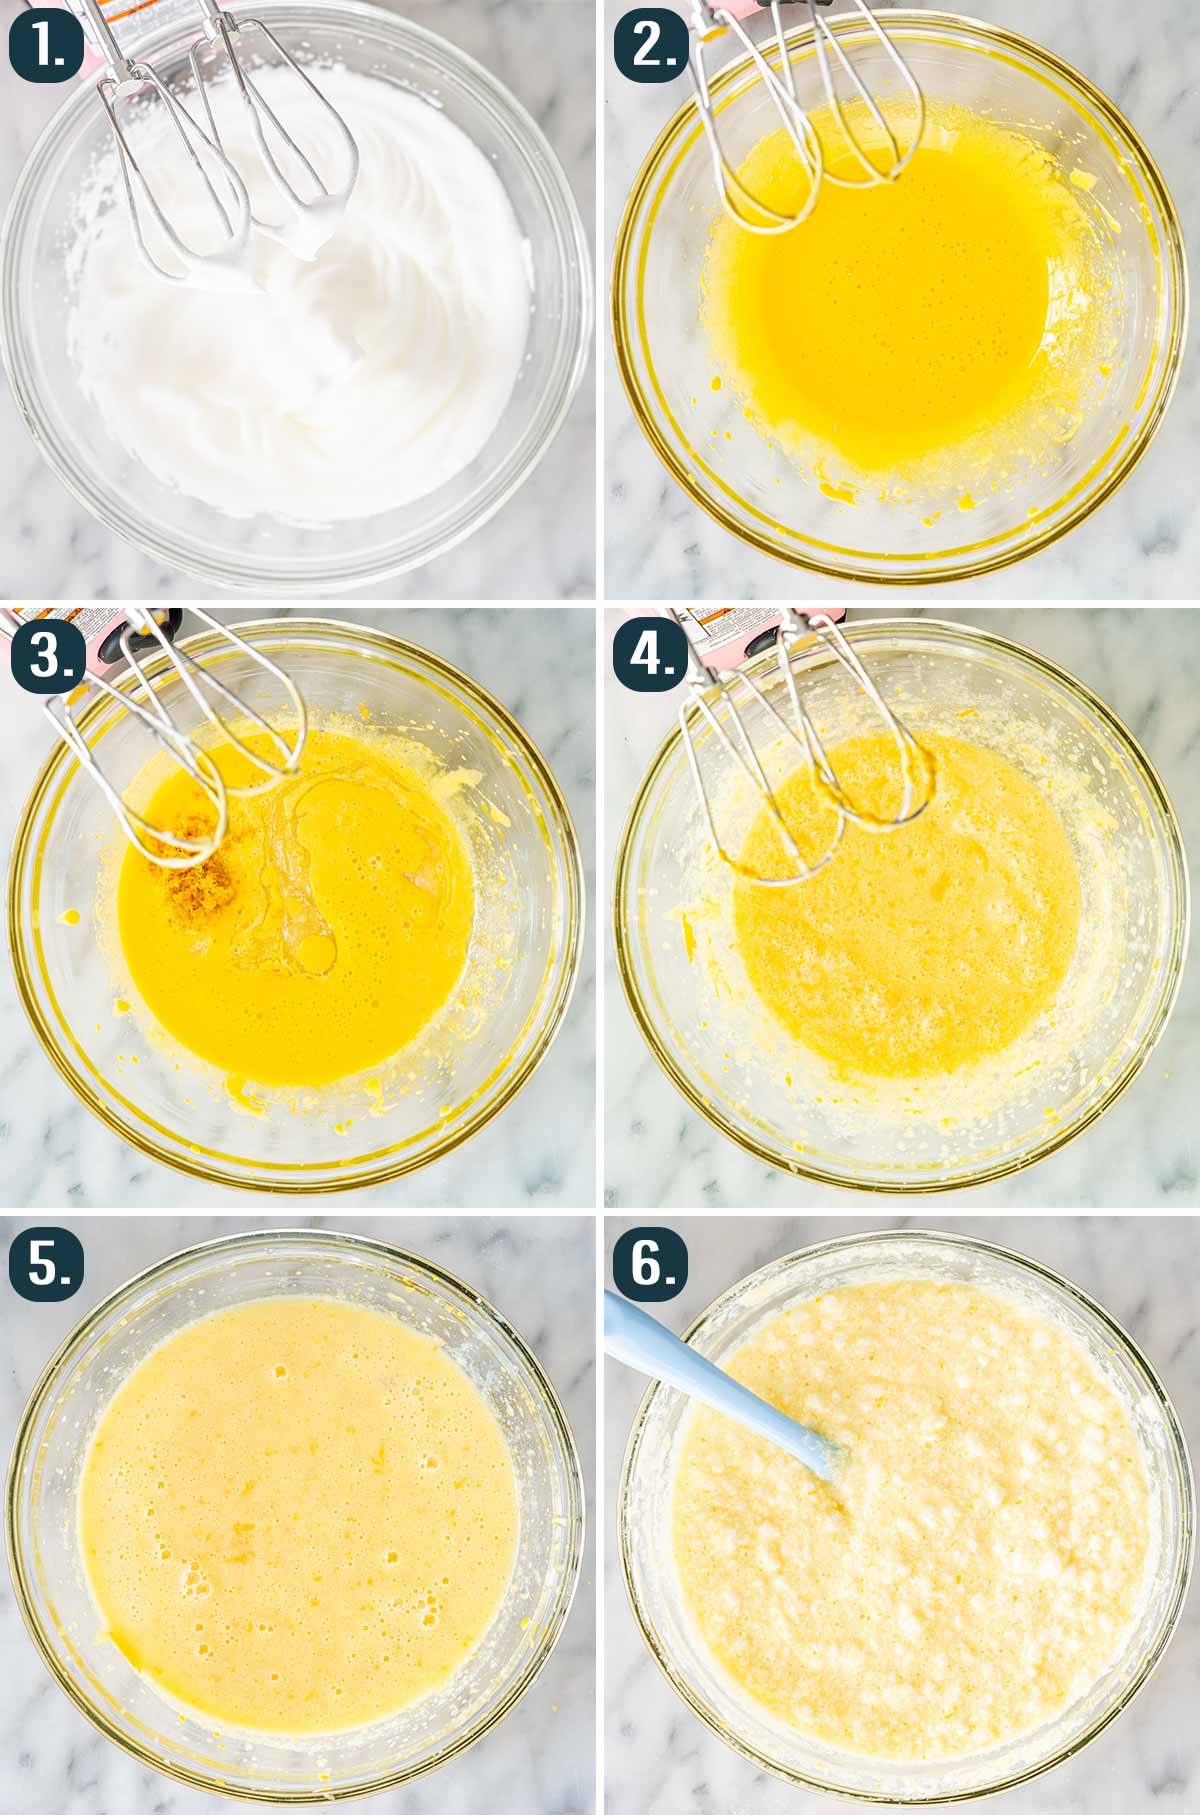 process shots showing how to make the batter for lemon pudding cakes.